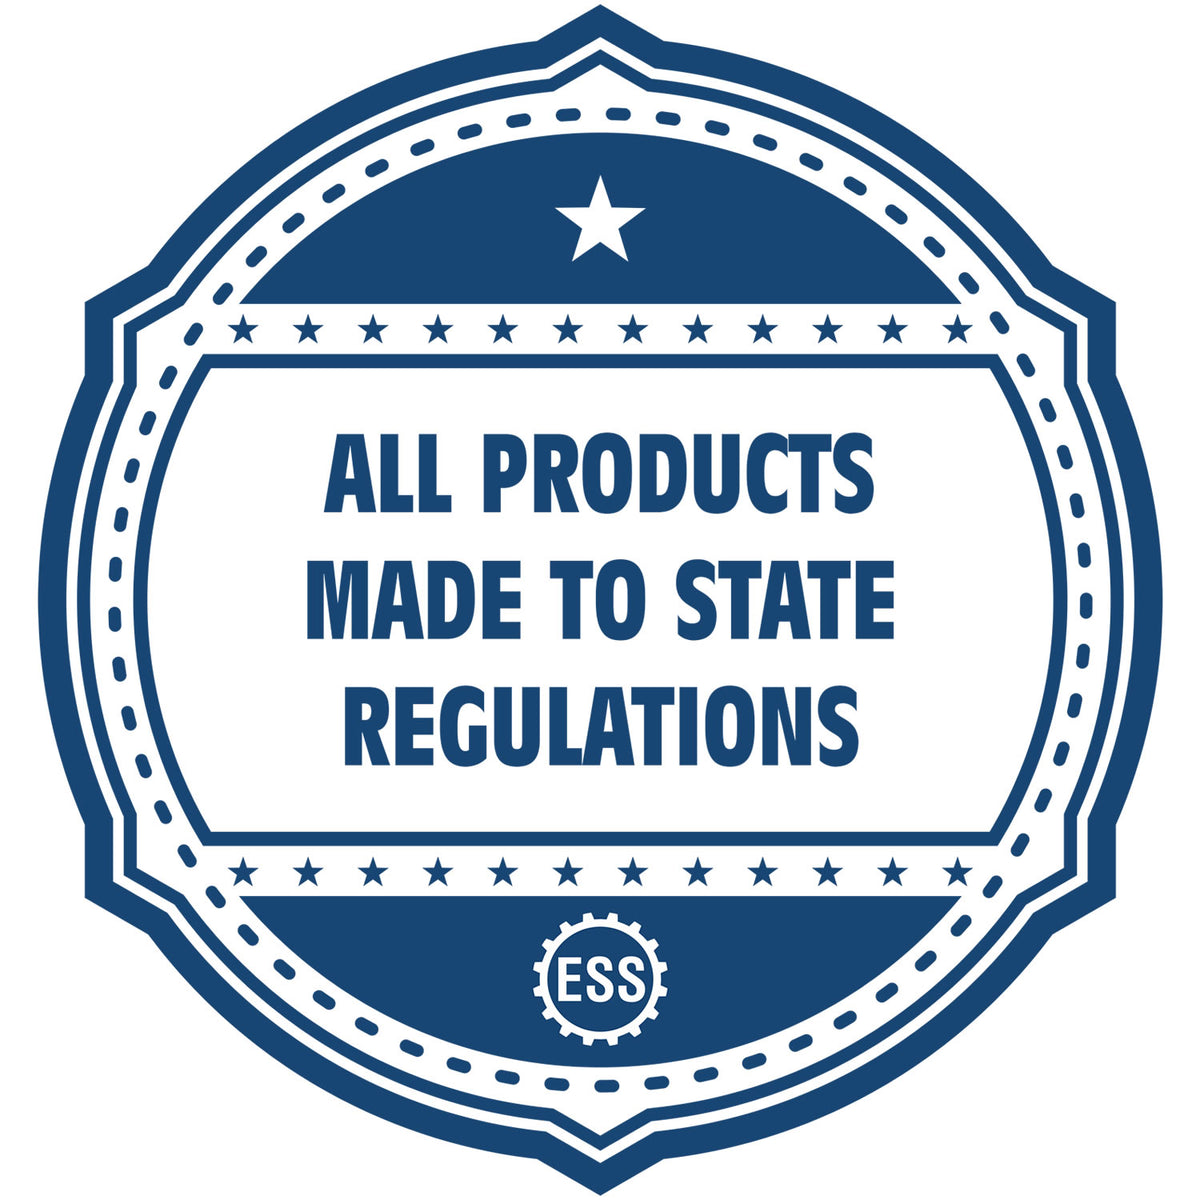 A blue icon or badge for the Hybrid Arizona Landscape Architect Seal showing that this product is made in compliance with state regulations.